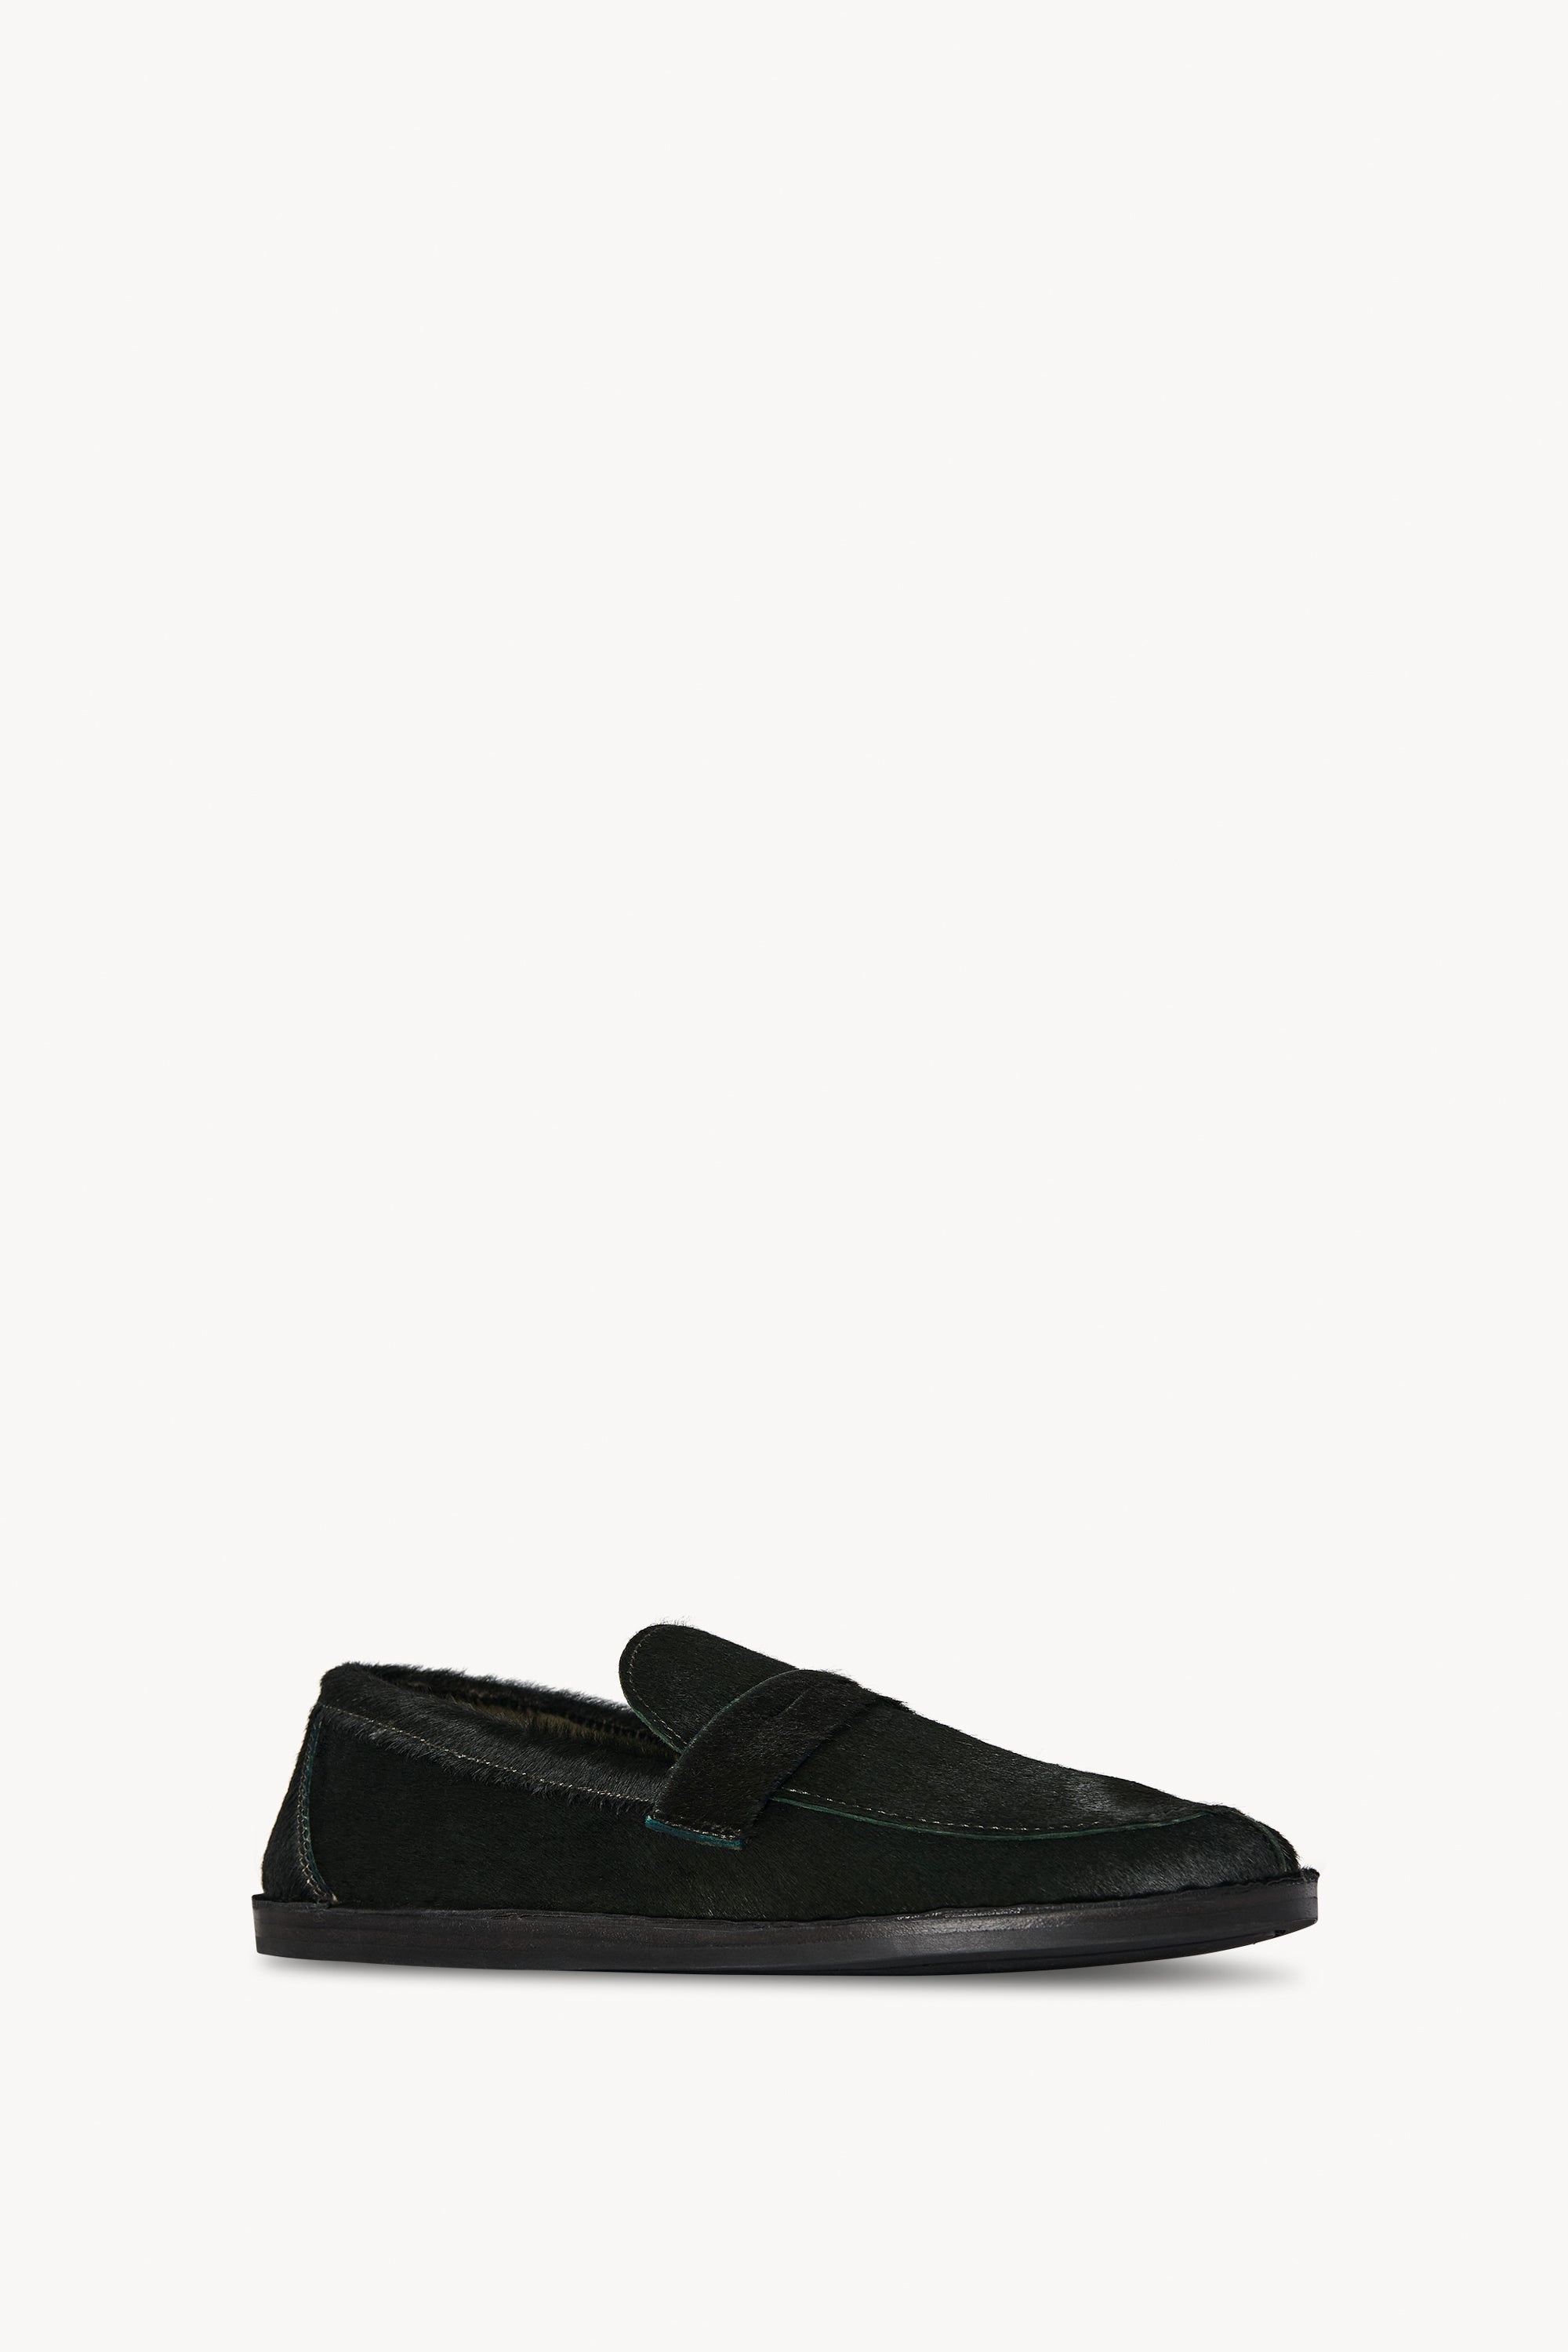 Cary Loafer in Pony - 2